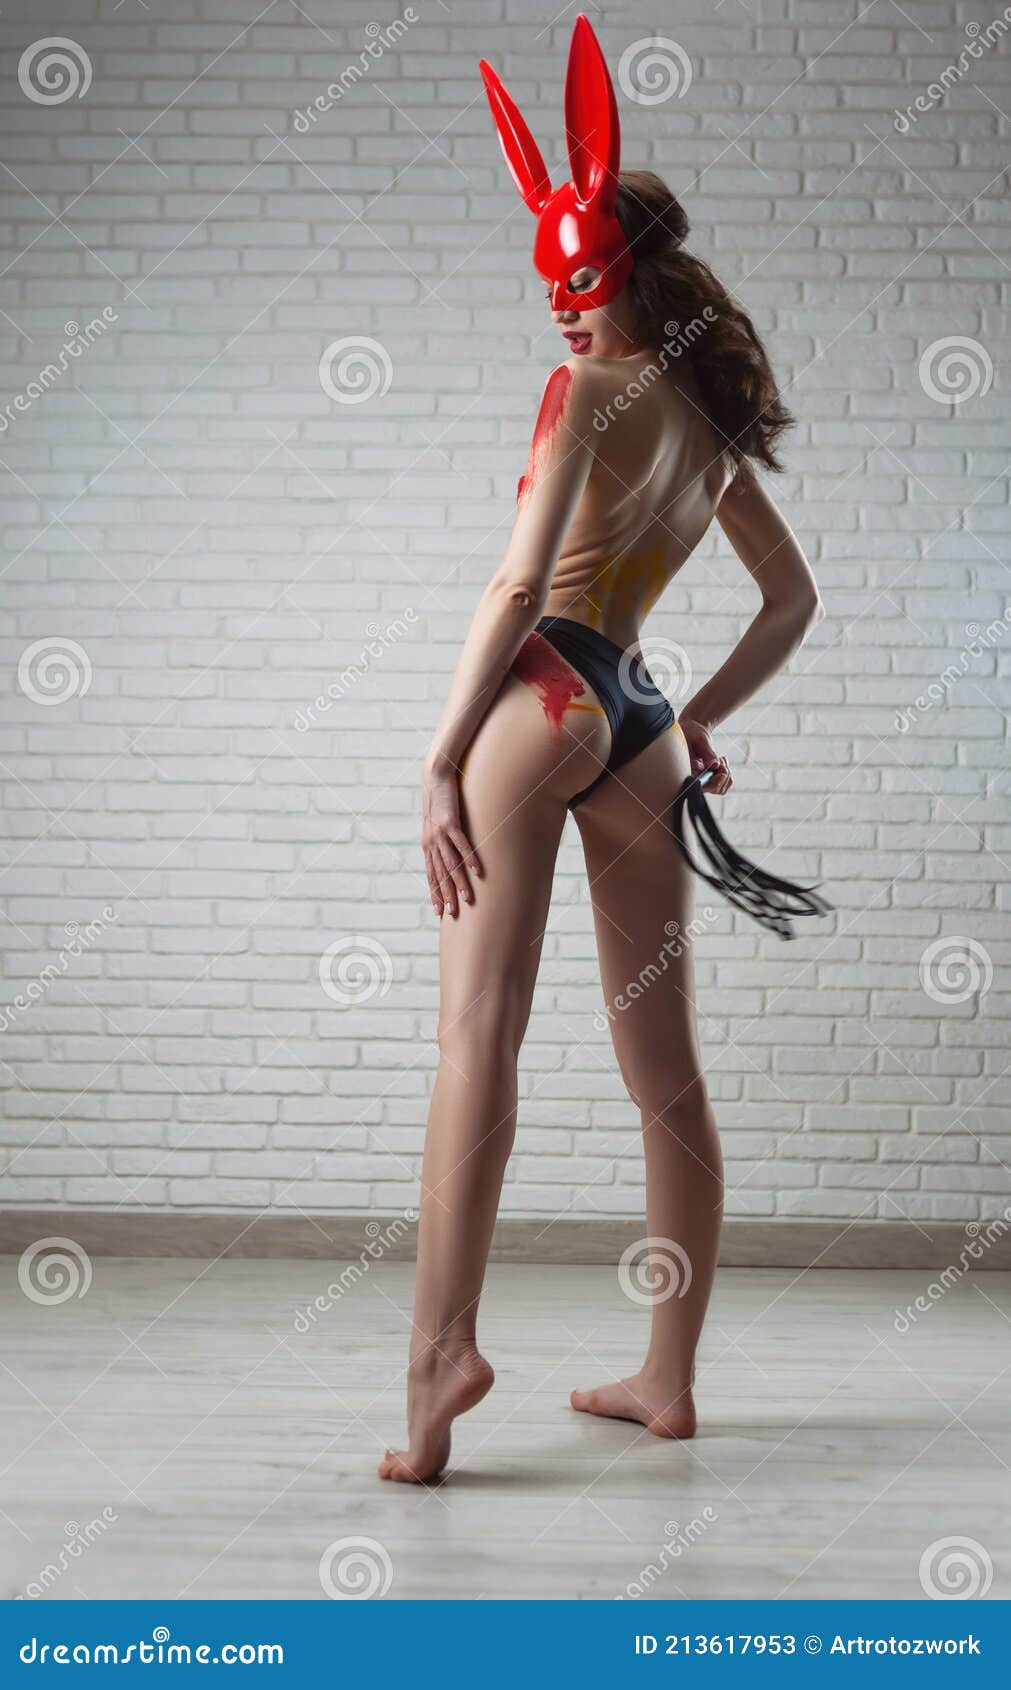 A Naked Woman in a Red Rabbit Mask Poses Against a Brick White Wall with a  Bdsm Whip Stock Image - Image of repair, roller: 213617953